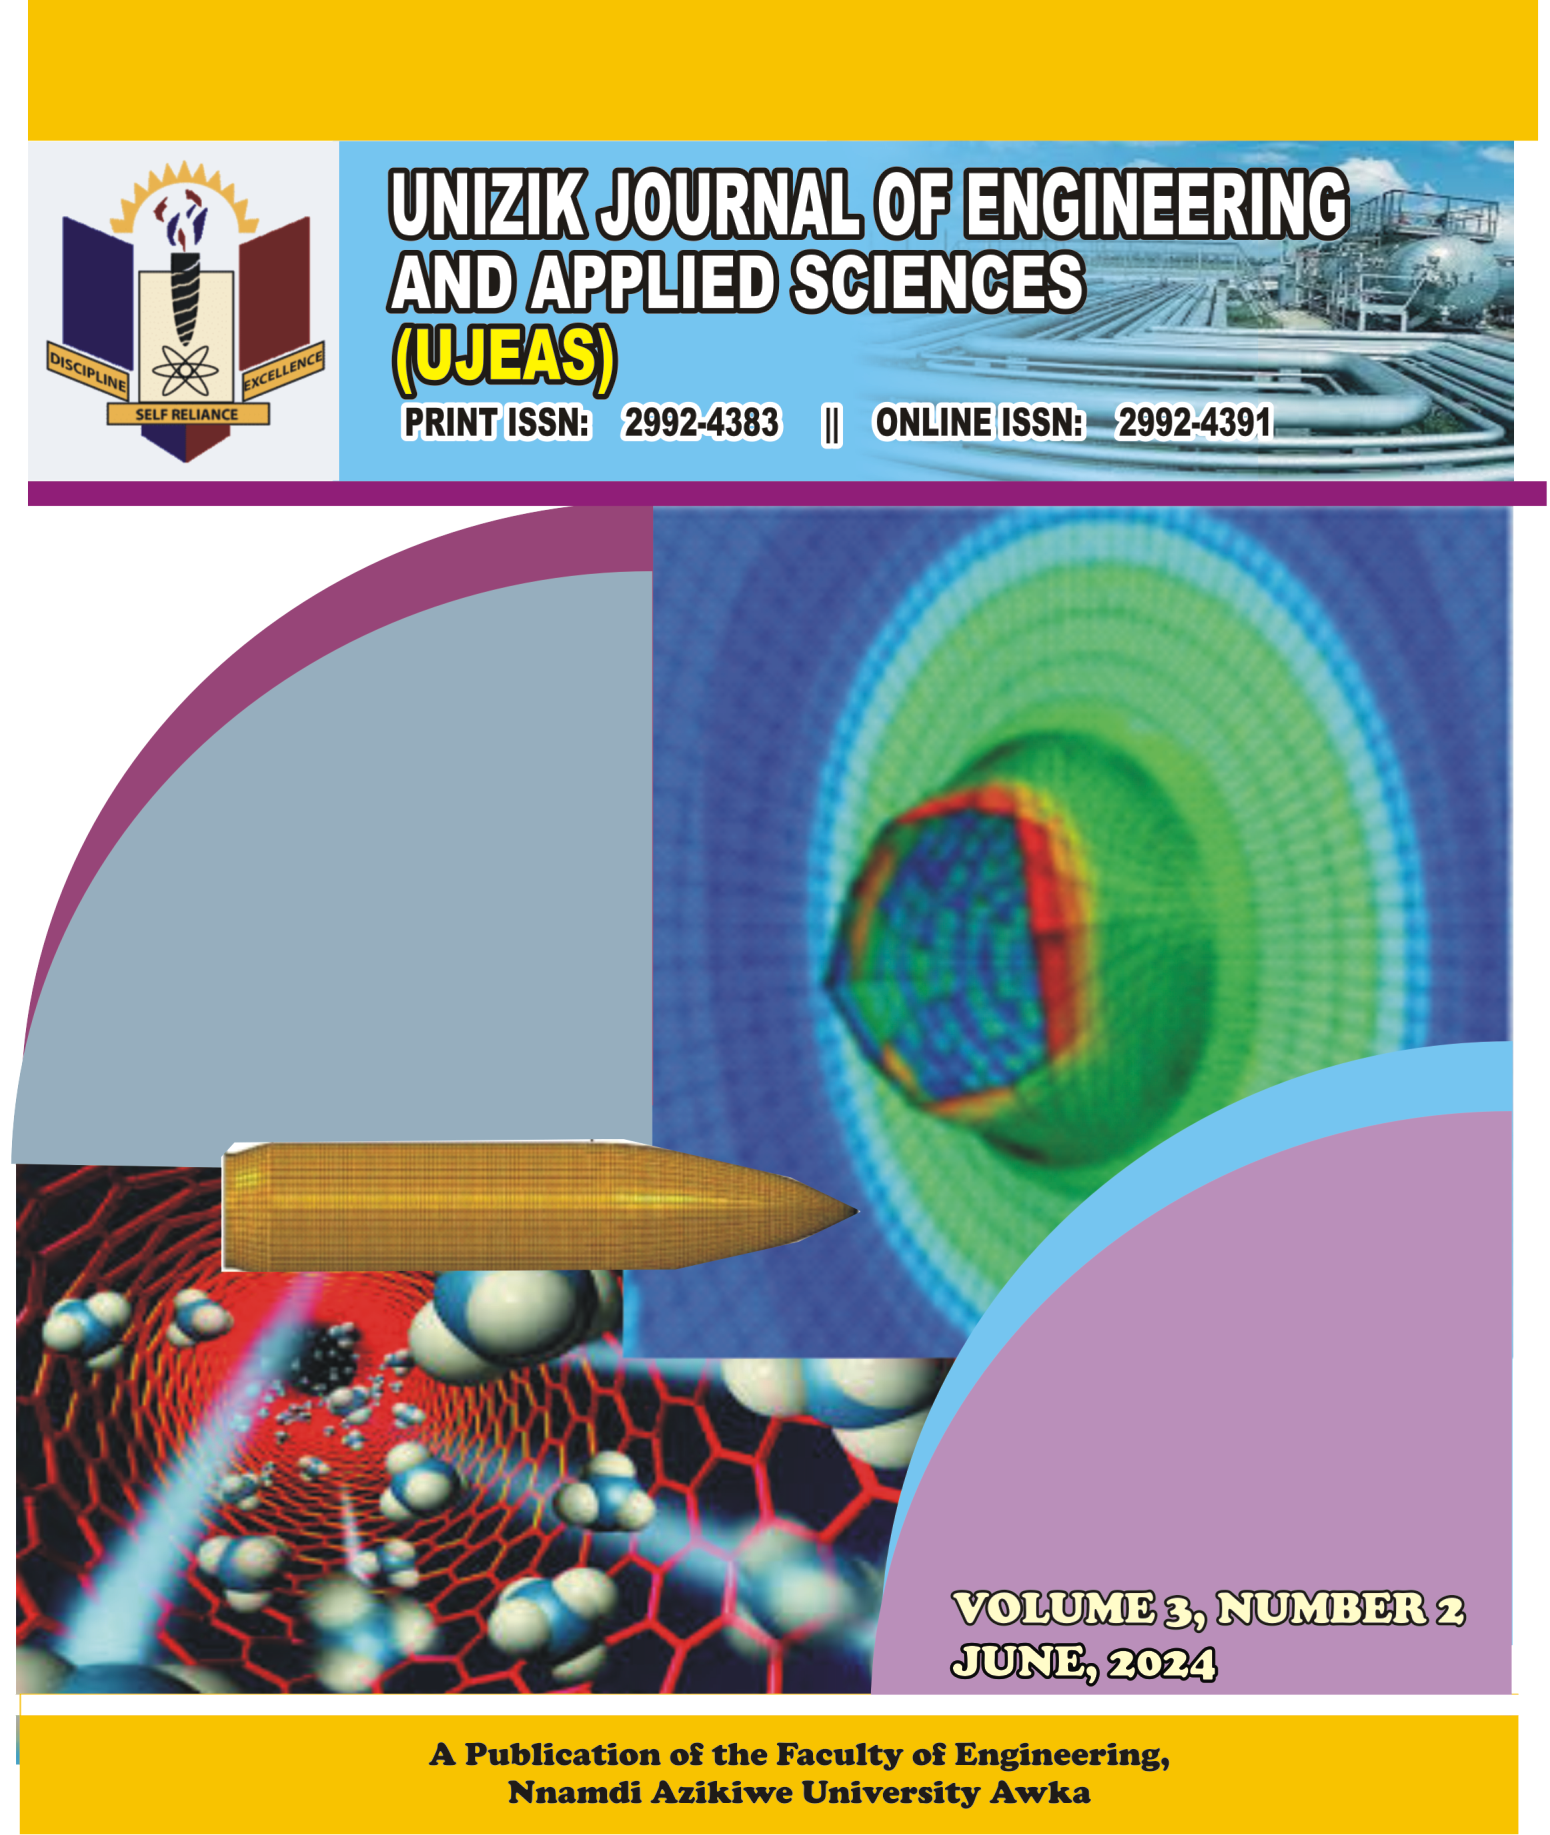 					View Vol. 3 No. 2 (2024): UNIZIK Journal of Engineering and Applied Sciences
				